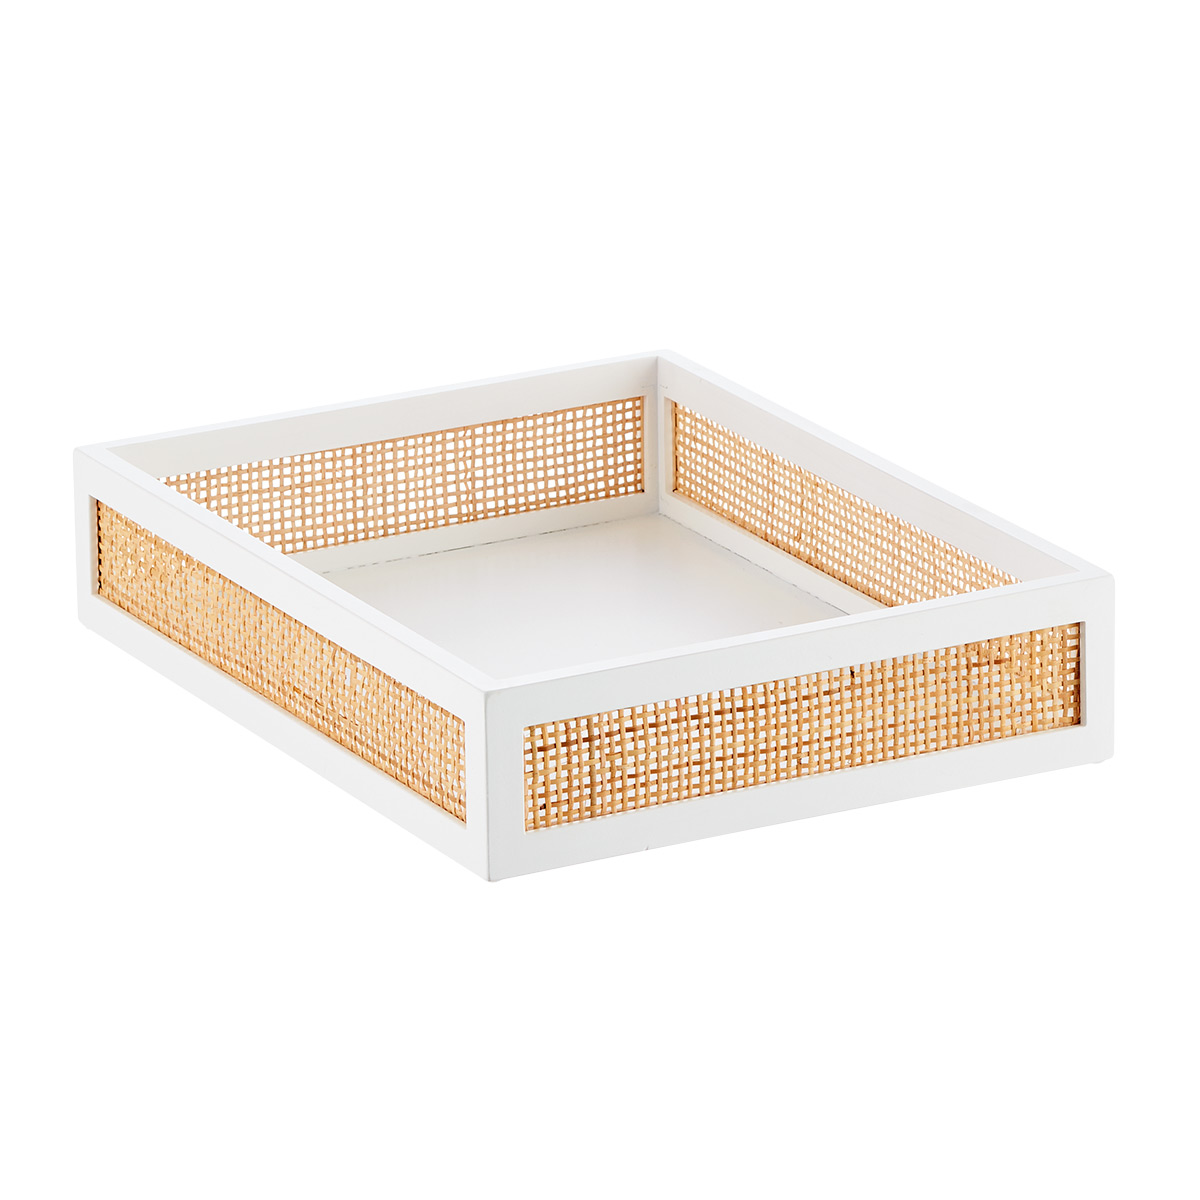 The Container Store Artisan Rattan Cane Letter Tray | The Container Store